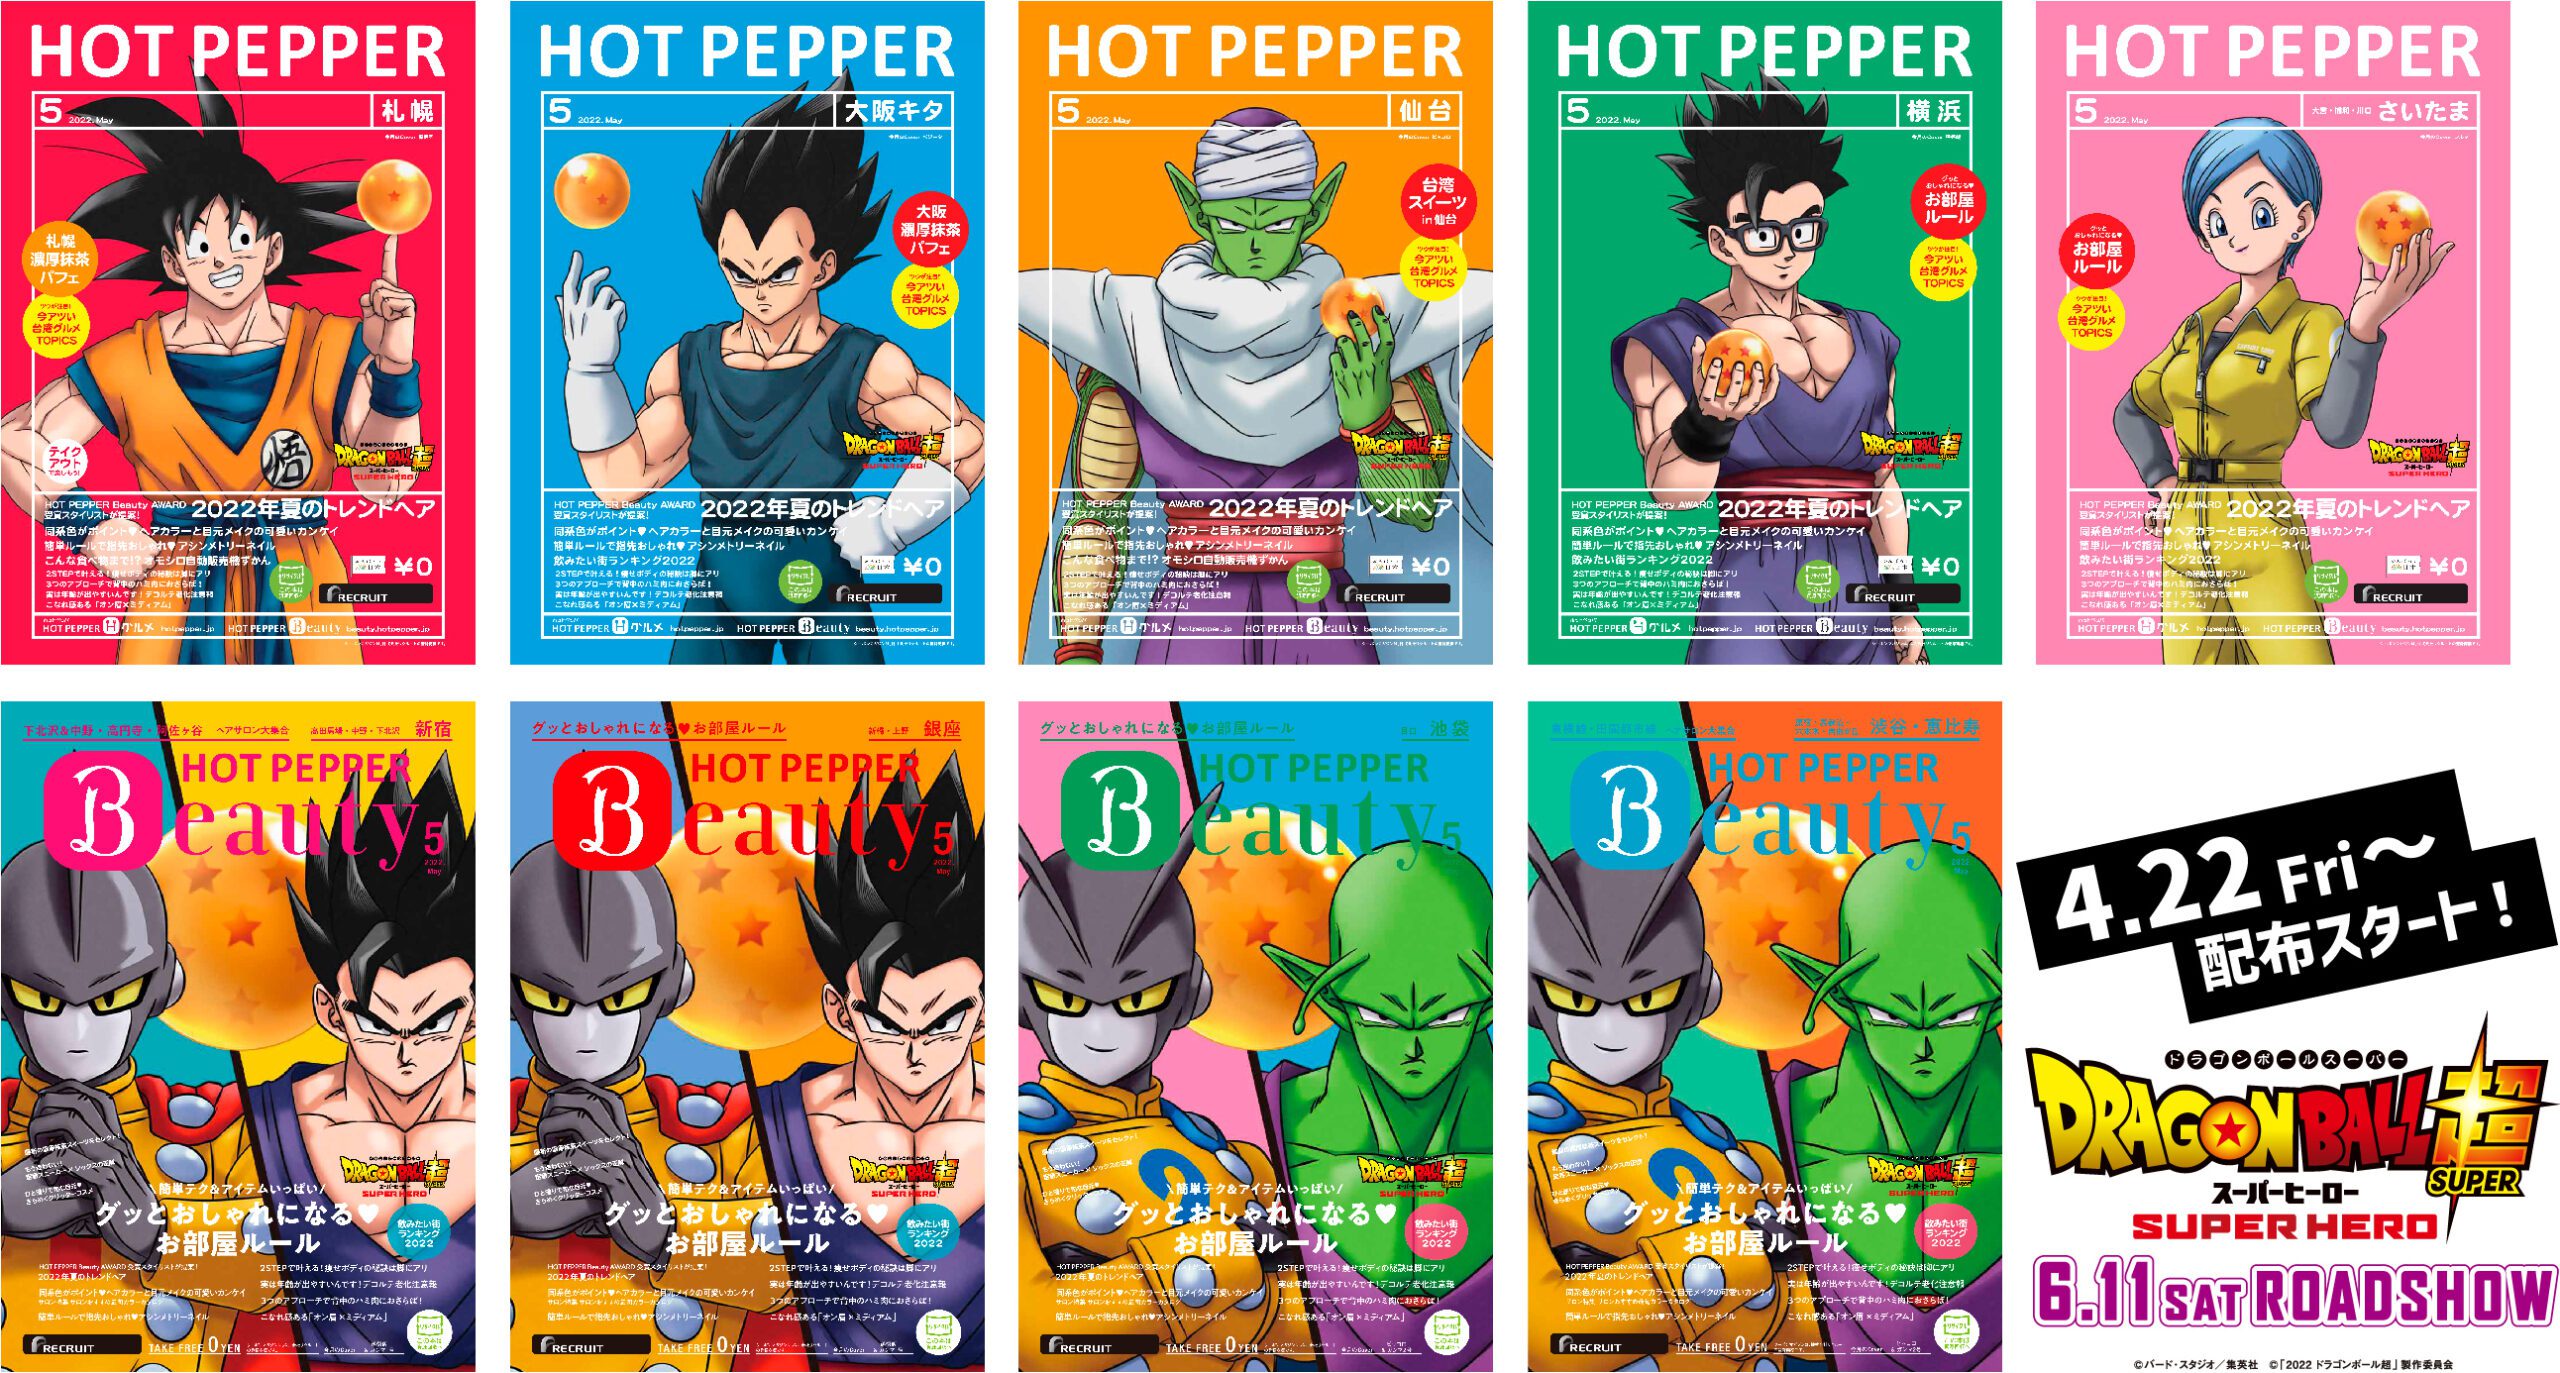 Dragon Ball Super: Super Hero Collab with Hot Pepper